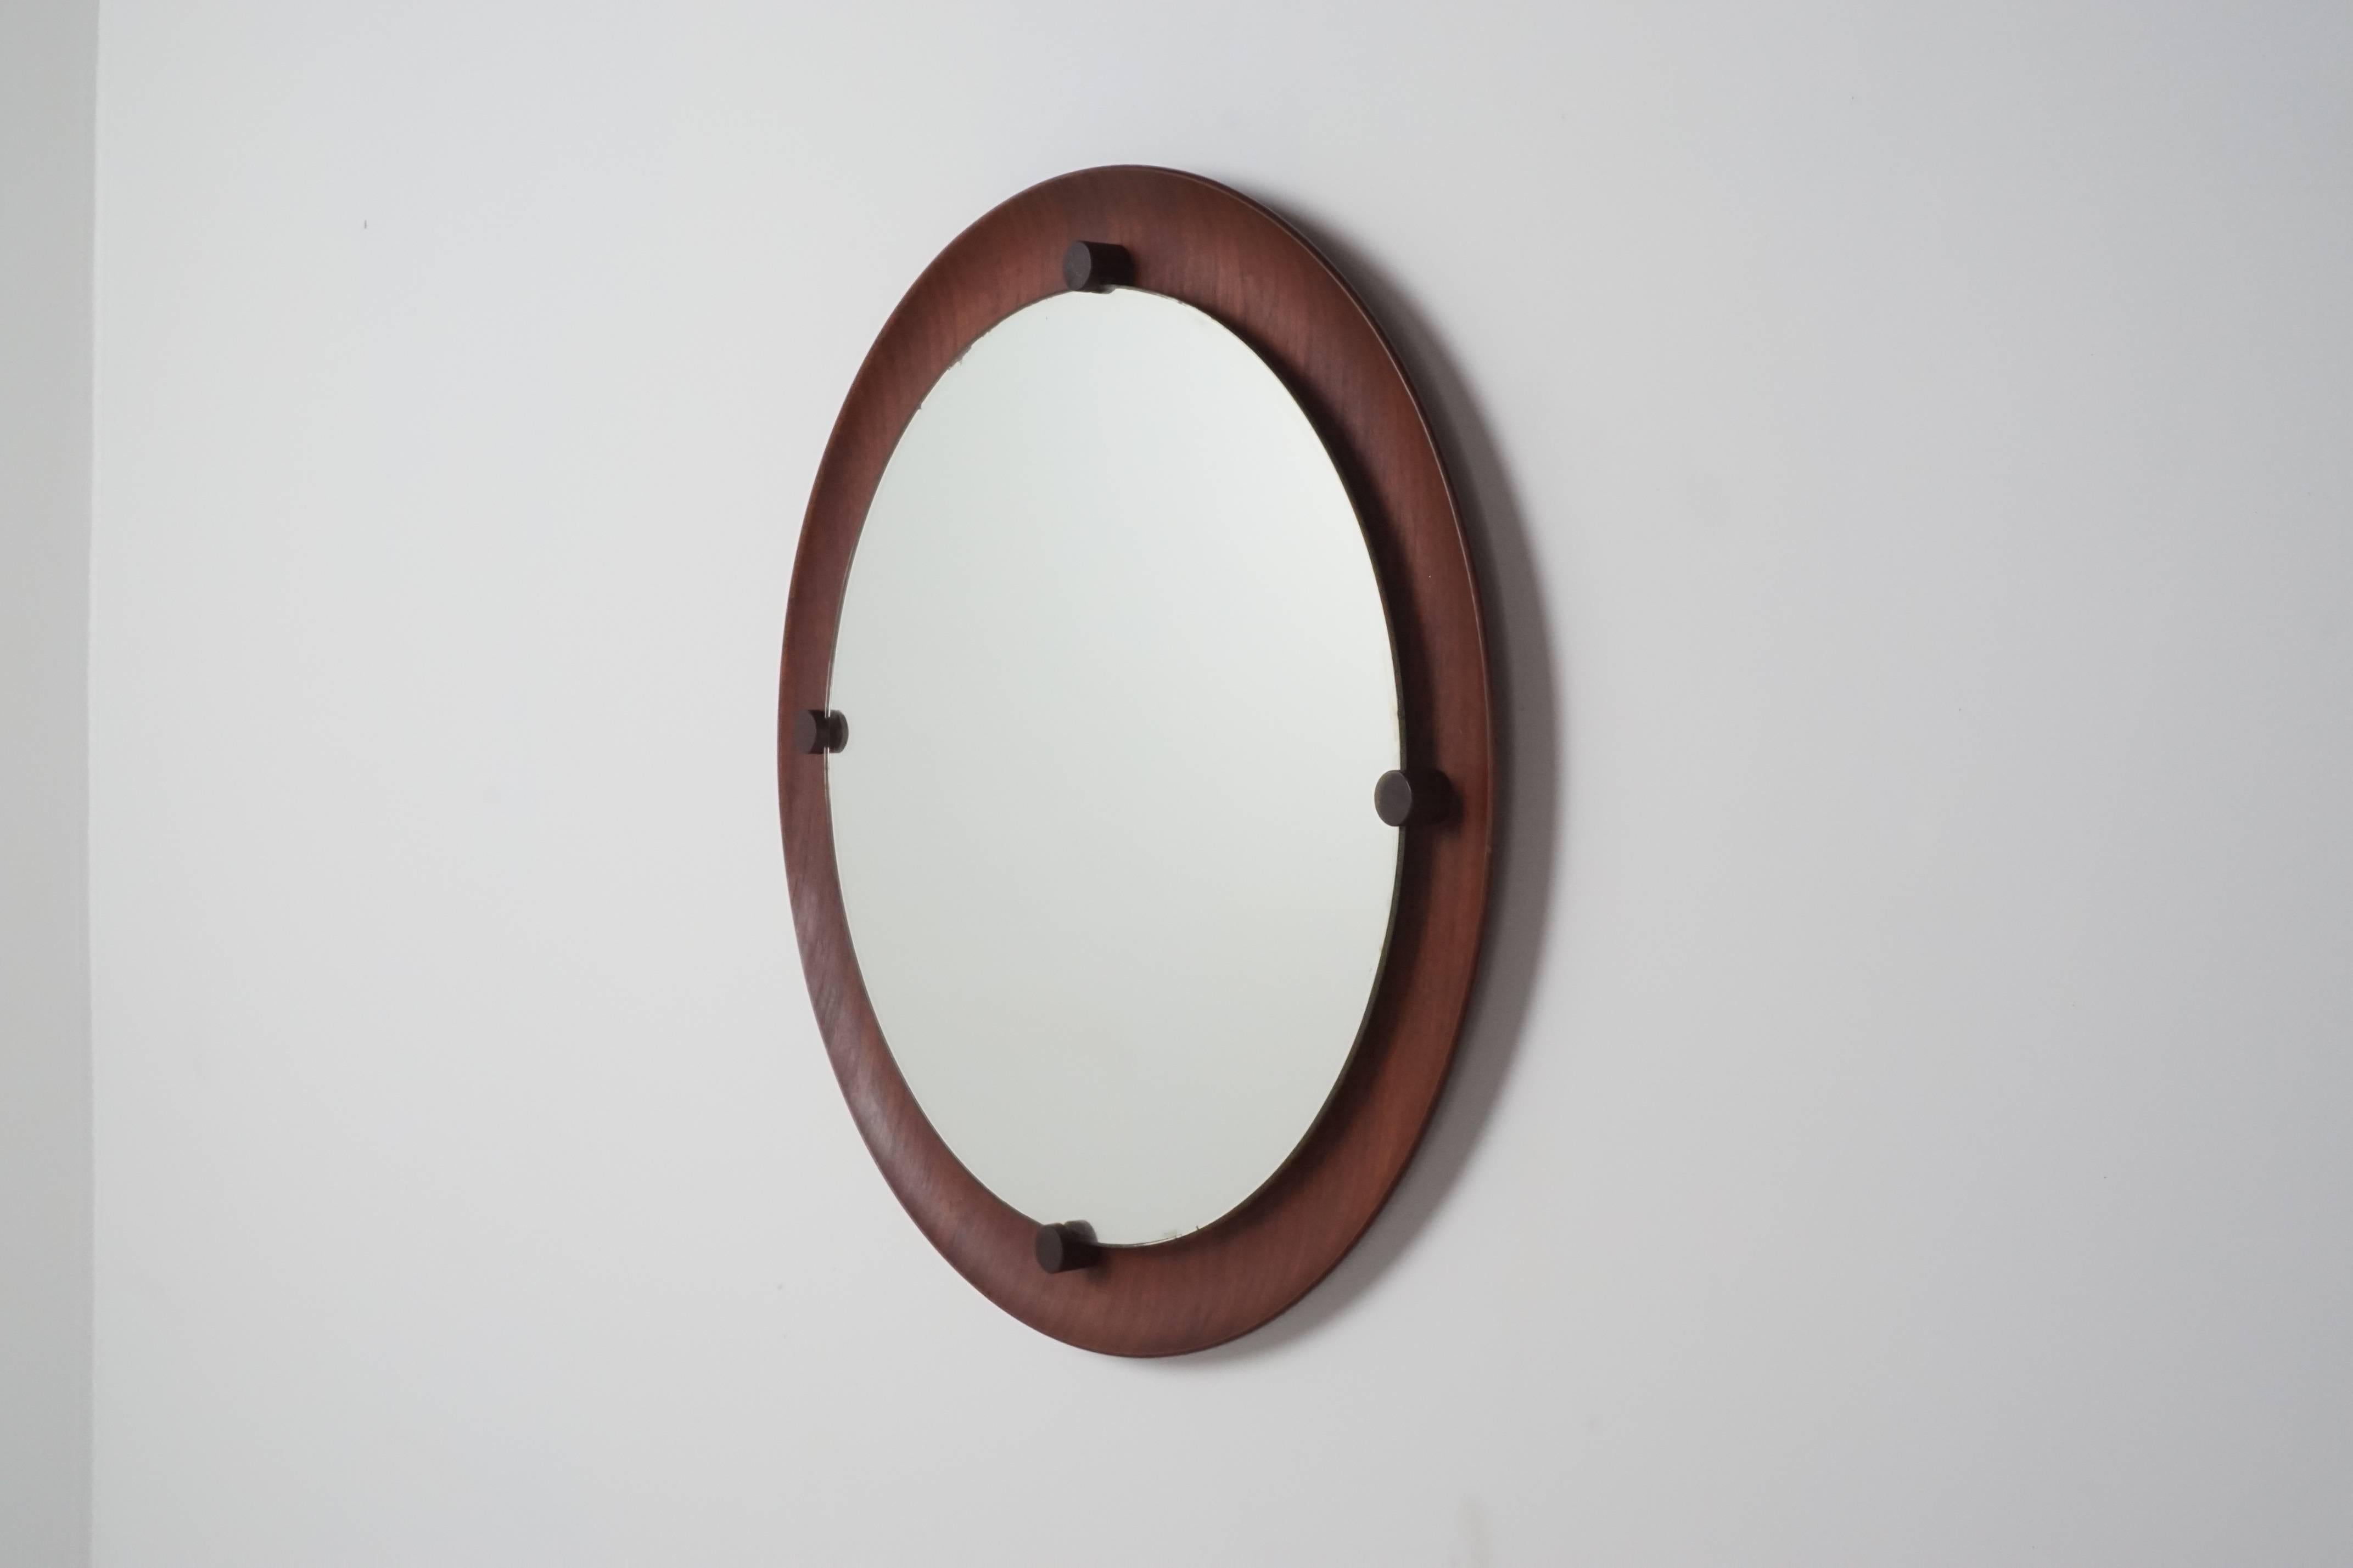 Beautiful Italian concave mahogany mirror frame with floating mirror.
Sold separately but would look beautiful as a pair.
 